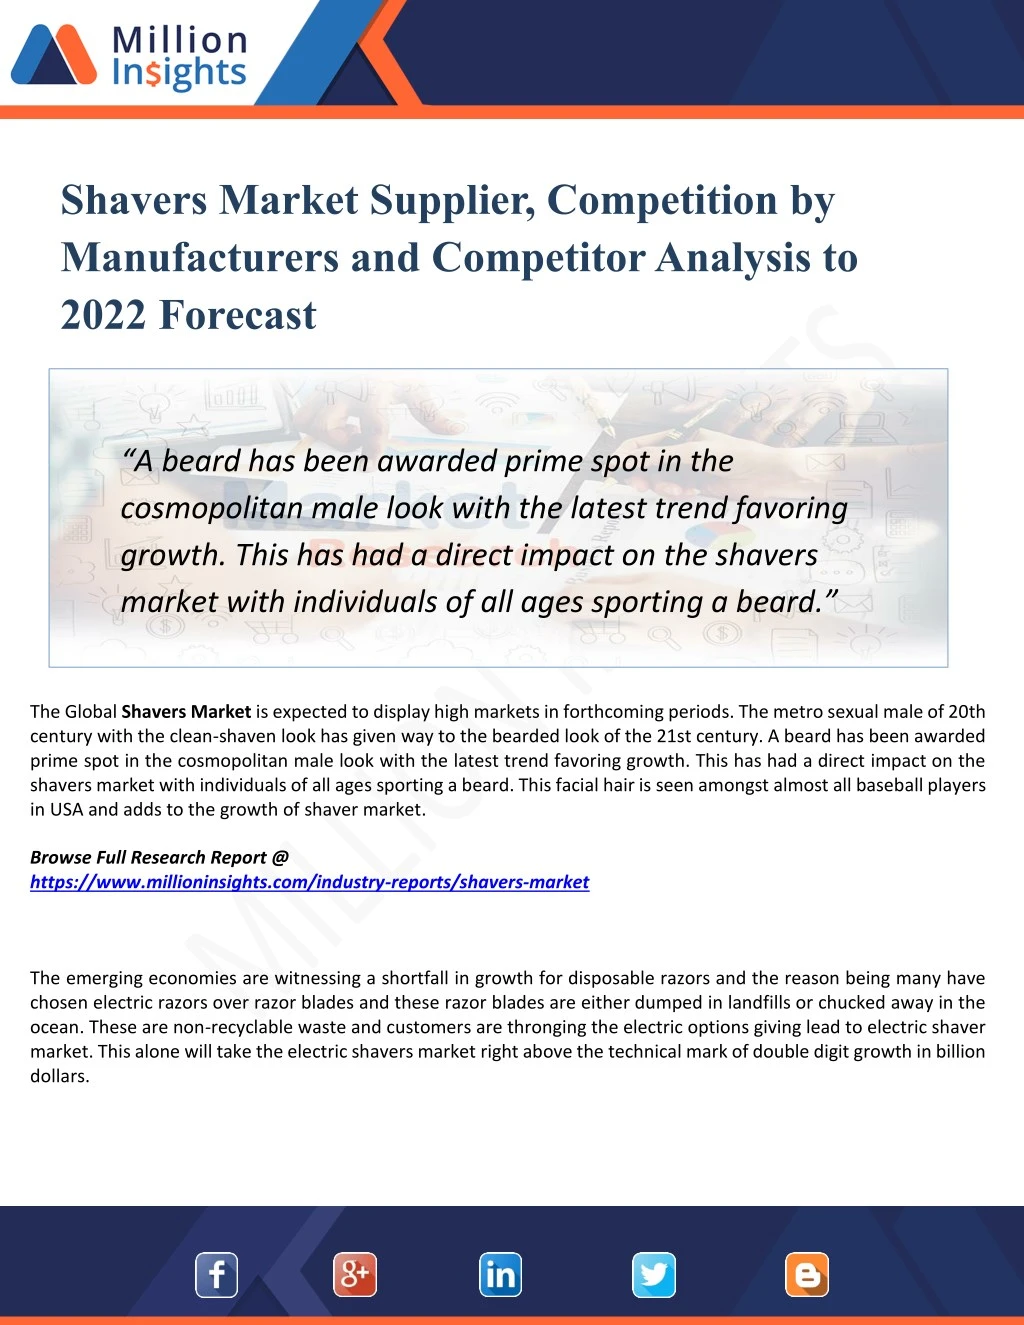 shavers market supplier competition